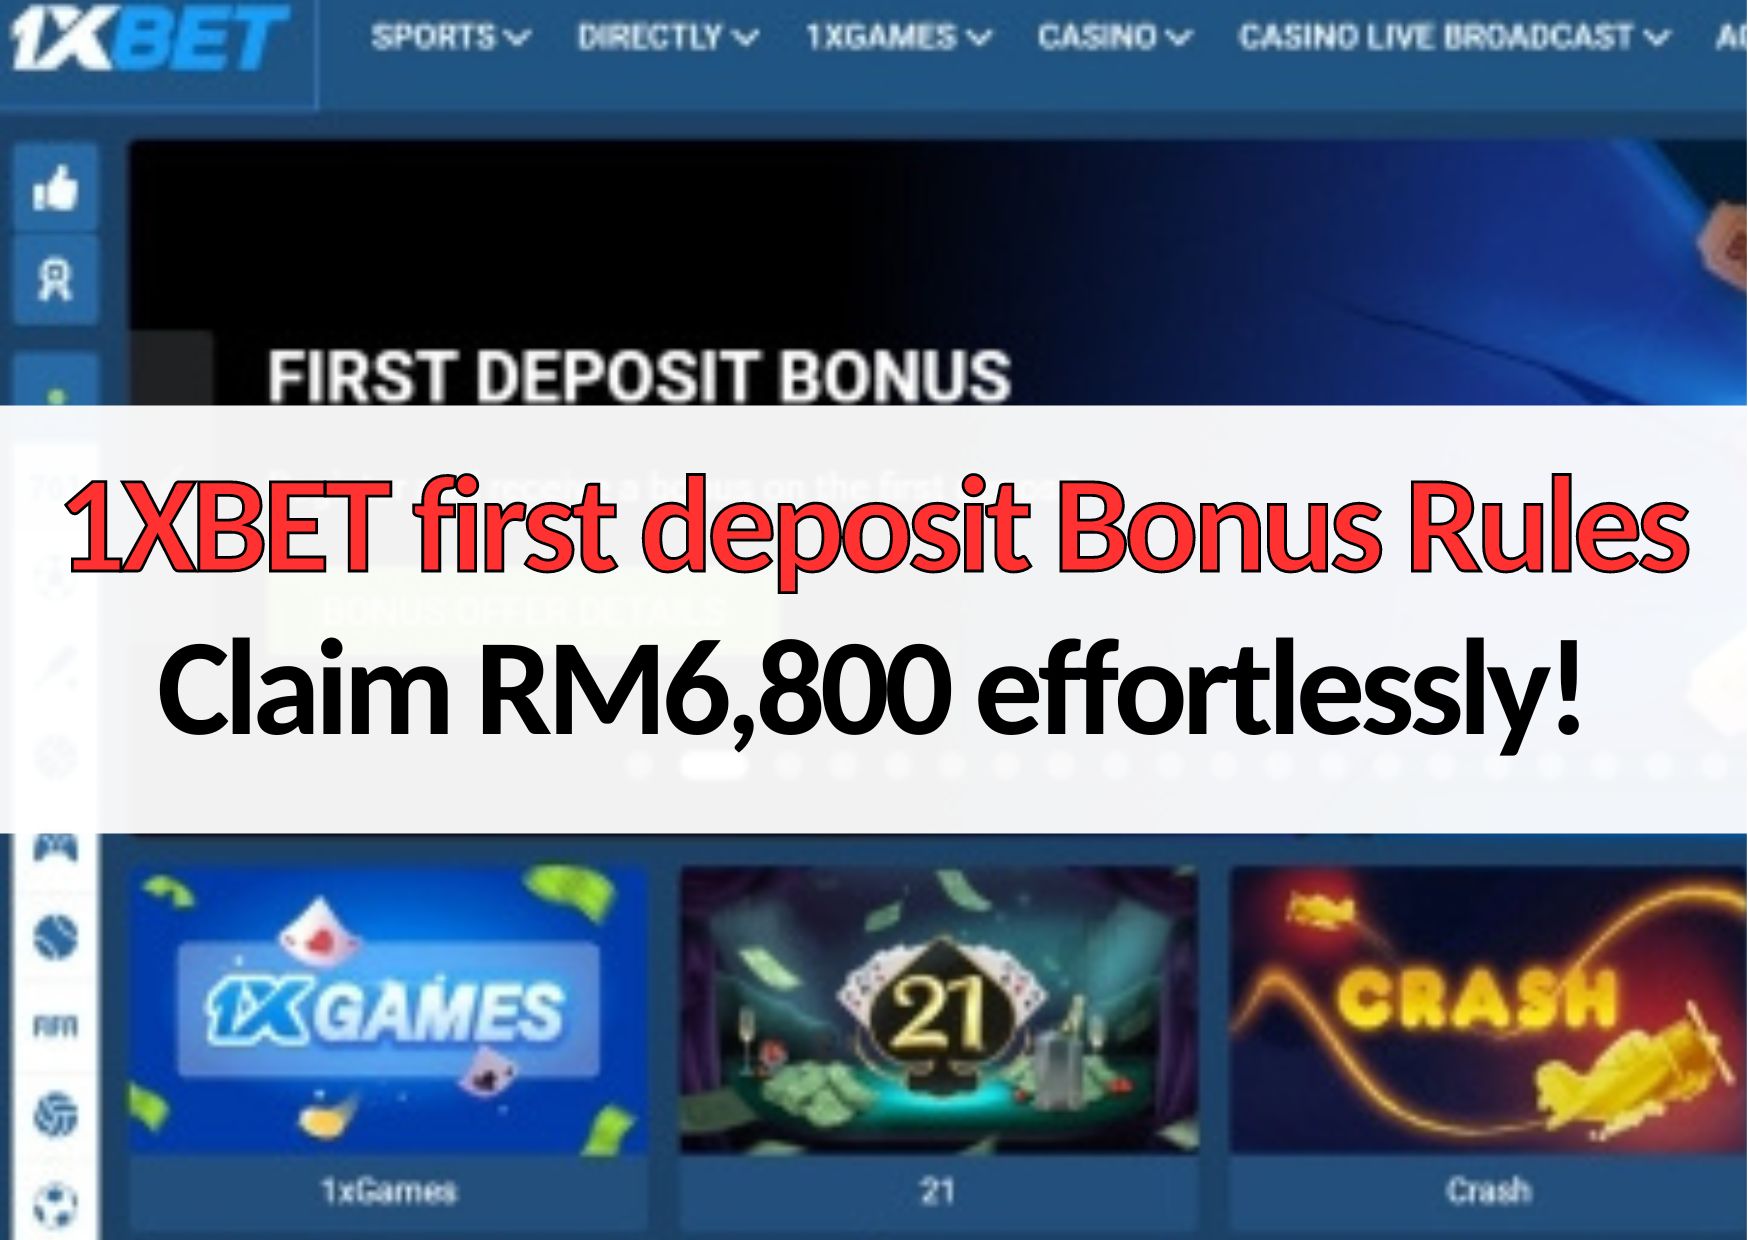 1xbet first deposit bonus rules to claim promotion offers easily